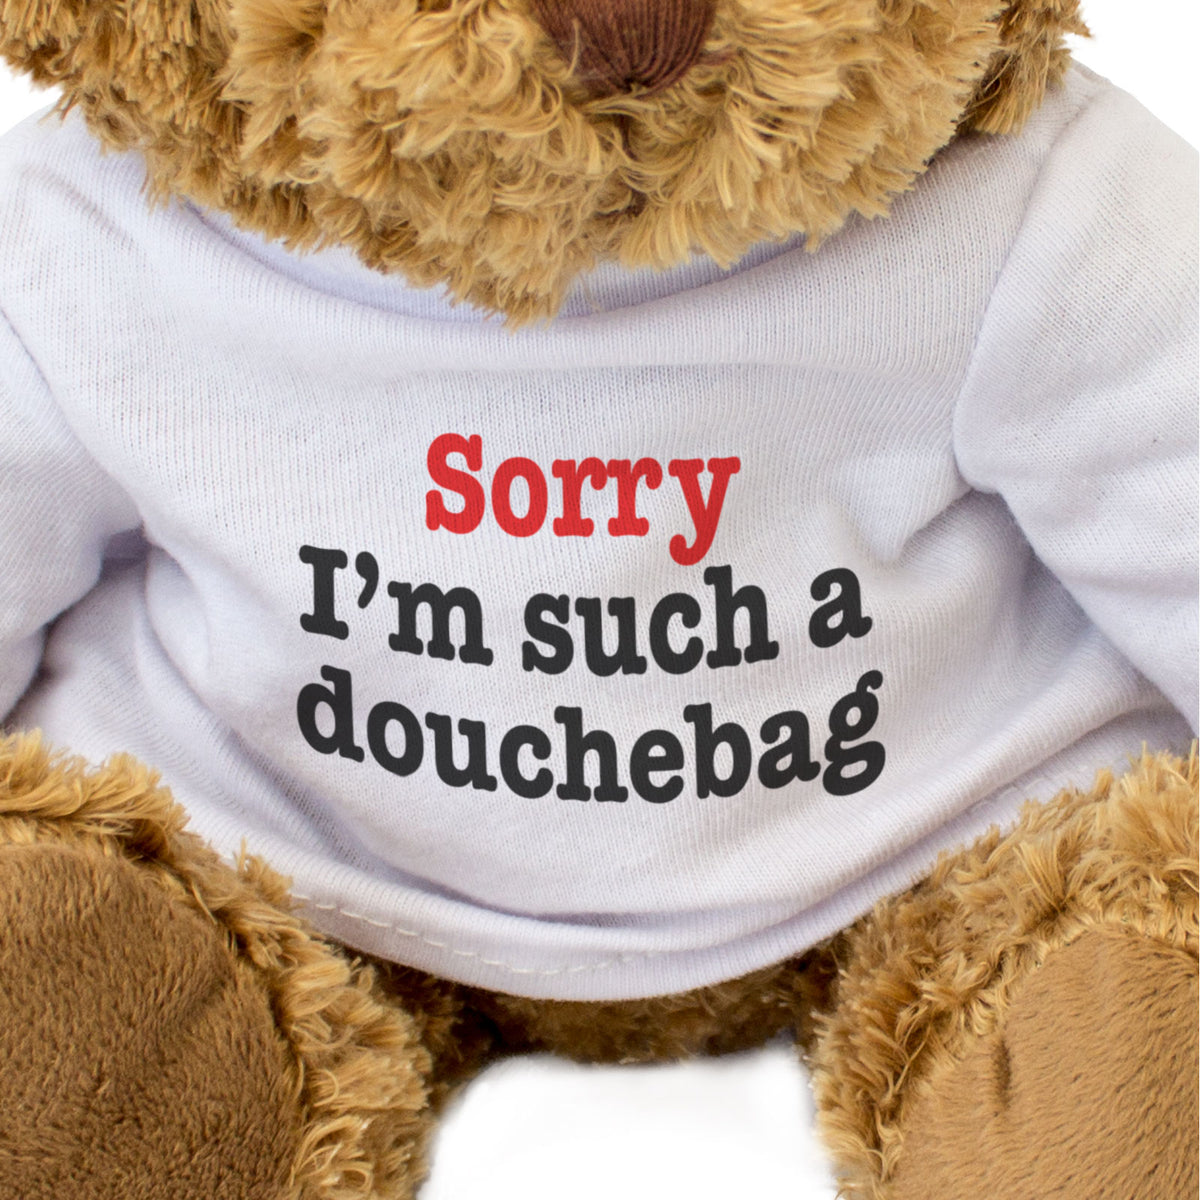 SORRY I'M SUCH A DOUCHEBAG - Teddy Bear - Gift Present Apology